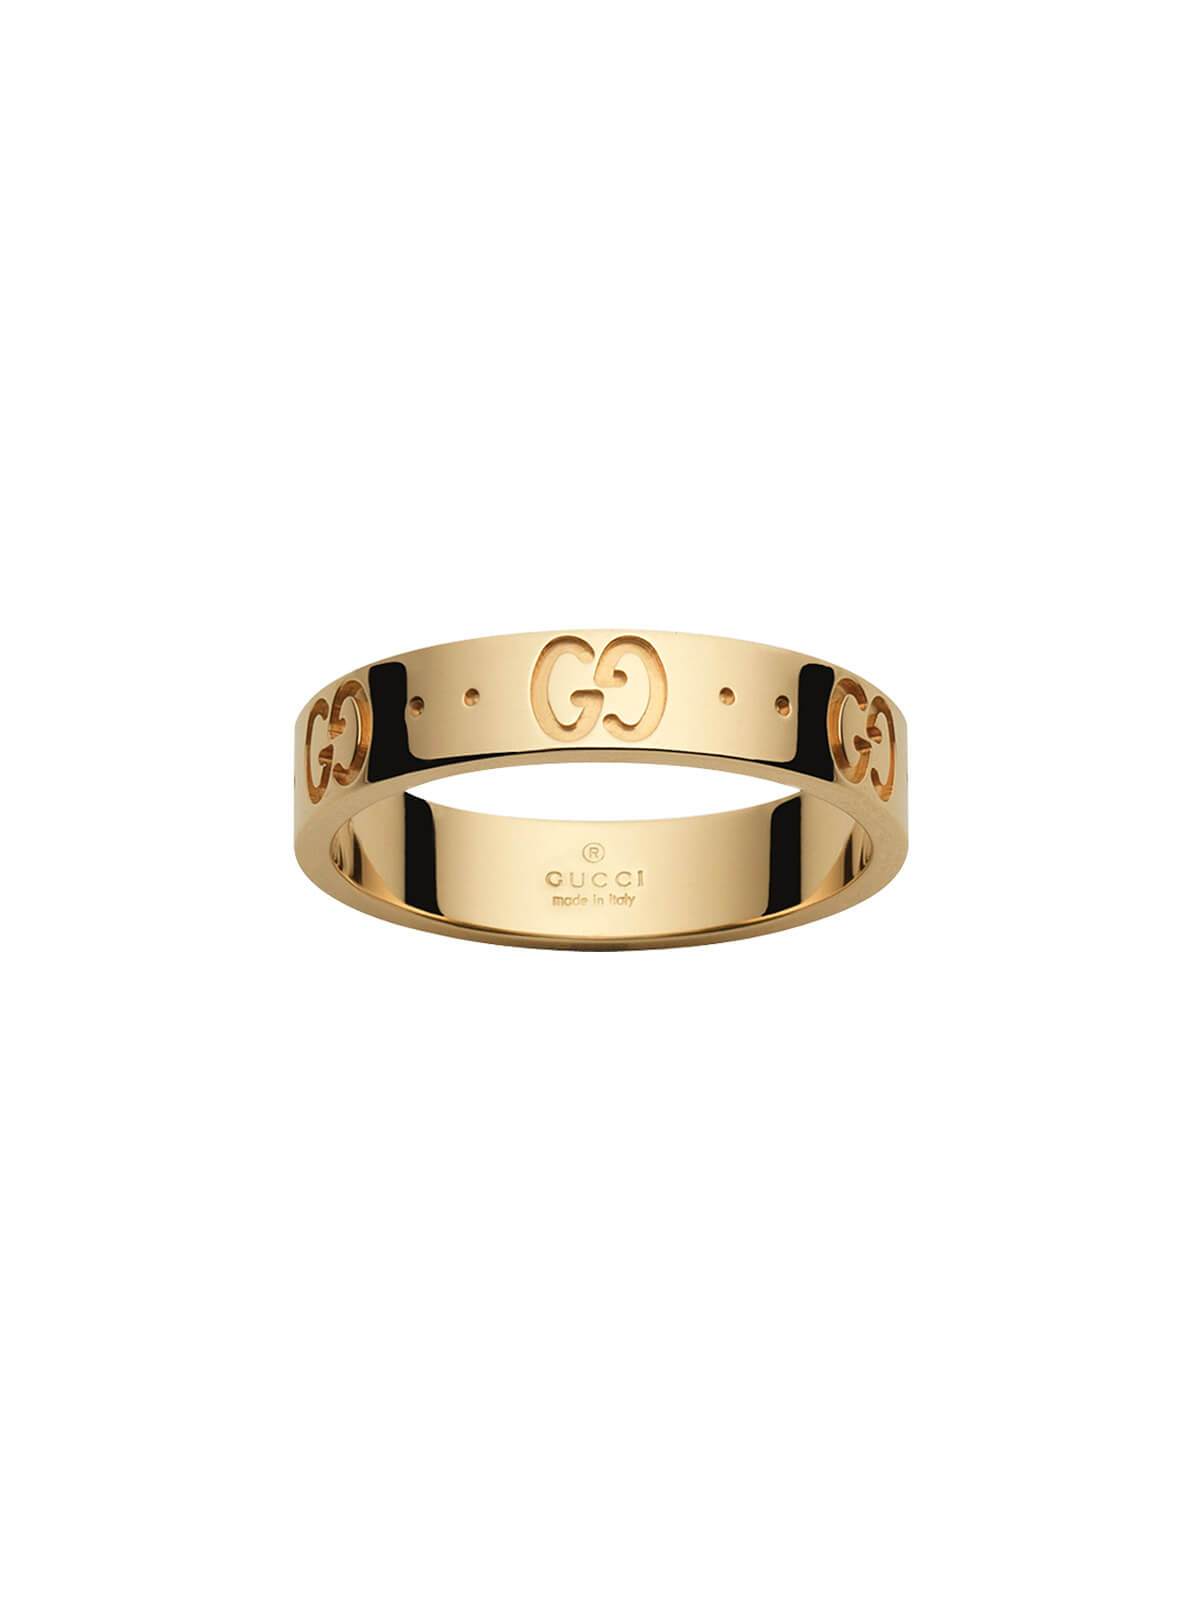 Gucci Icon Ring in 18ct Yellow Gold - Size M-N YBC073230001013